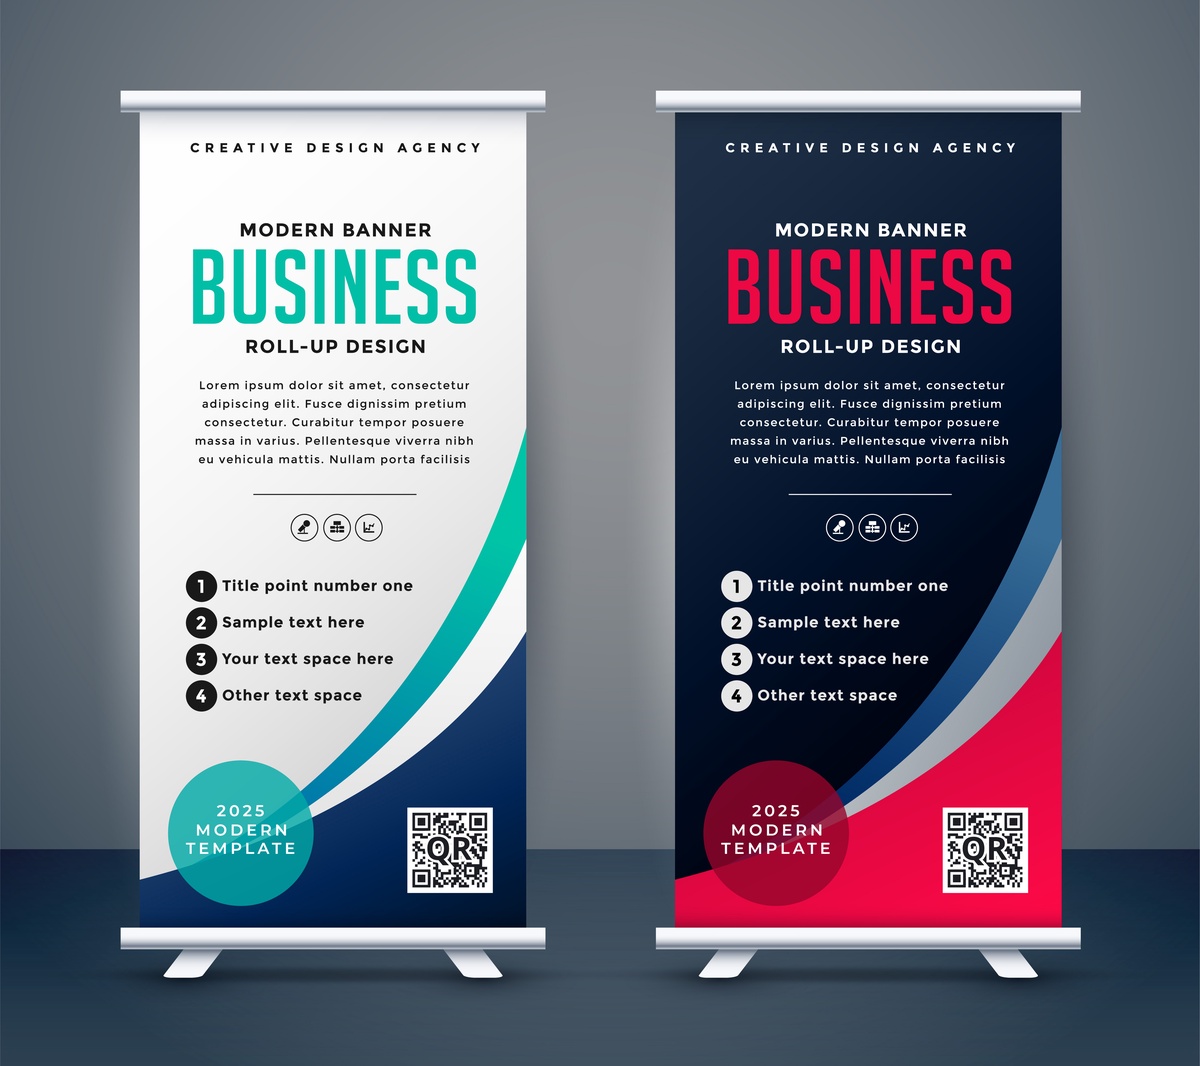 Affordable Banners Printing: How to Choose the Right Company